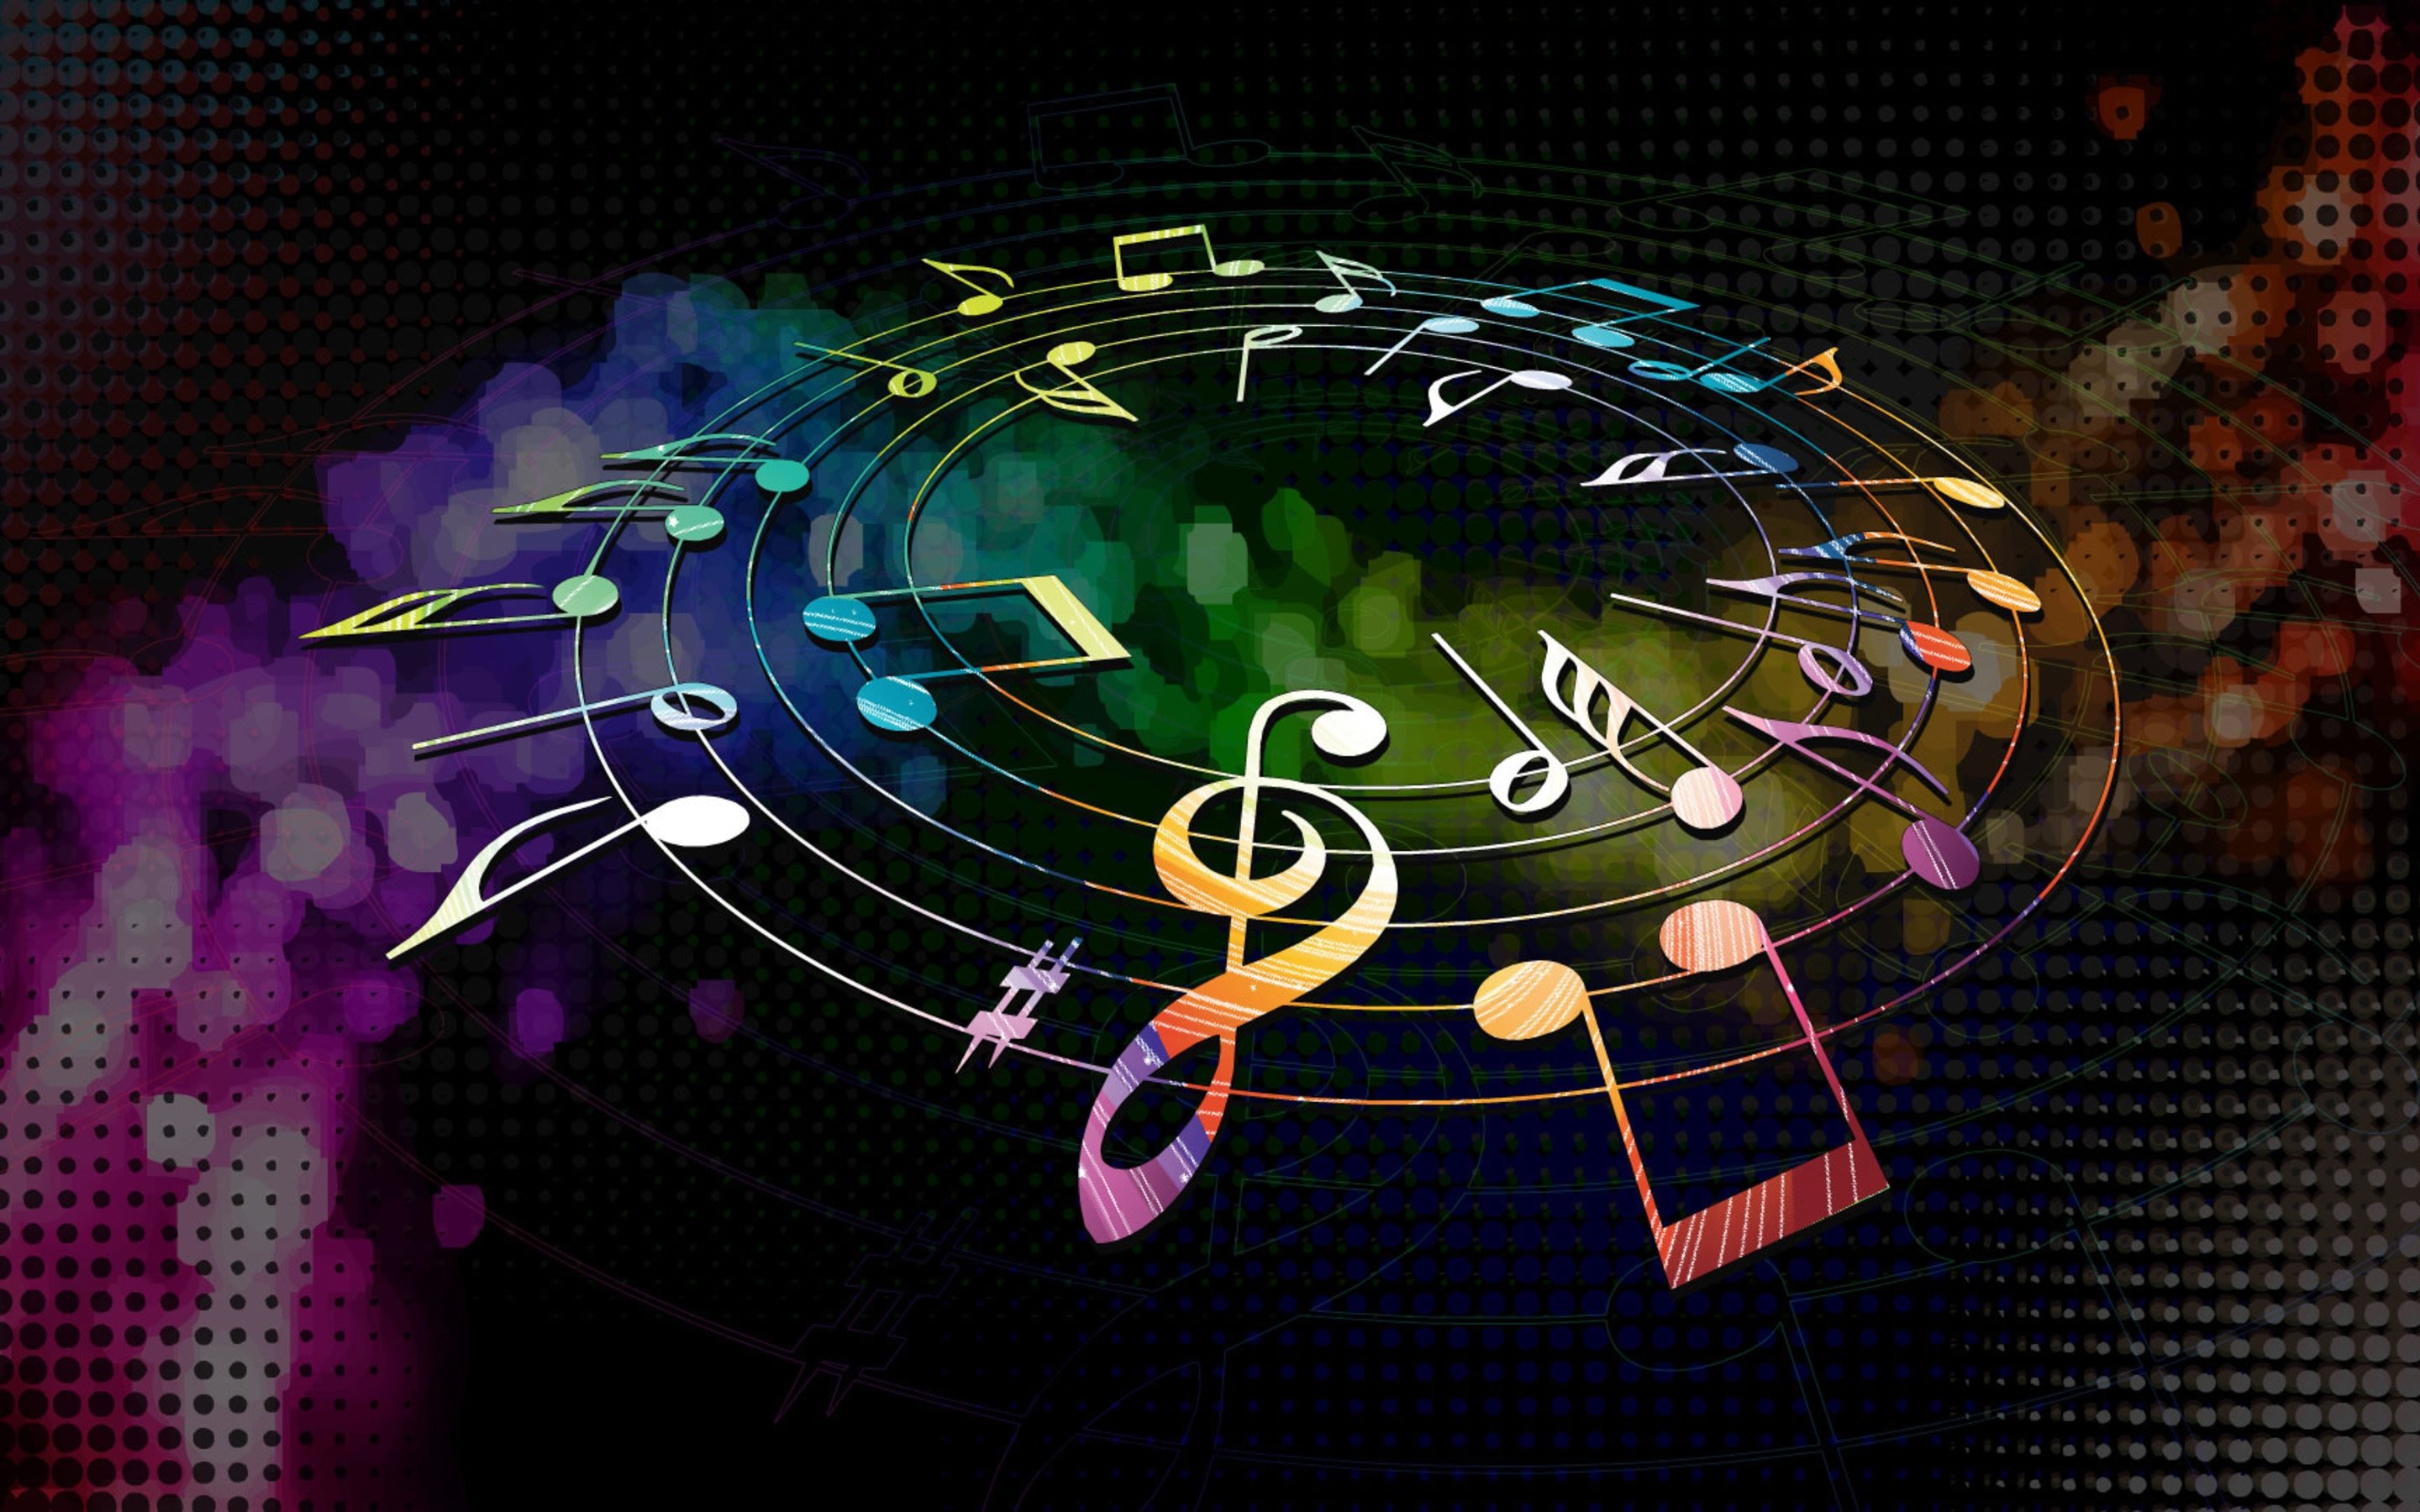 Free background music download - petroxoler